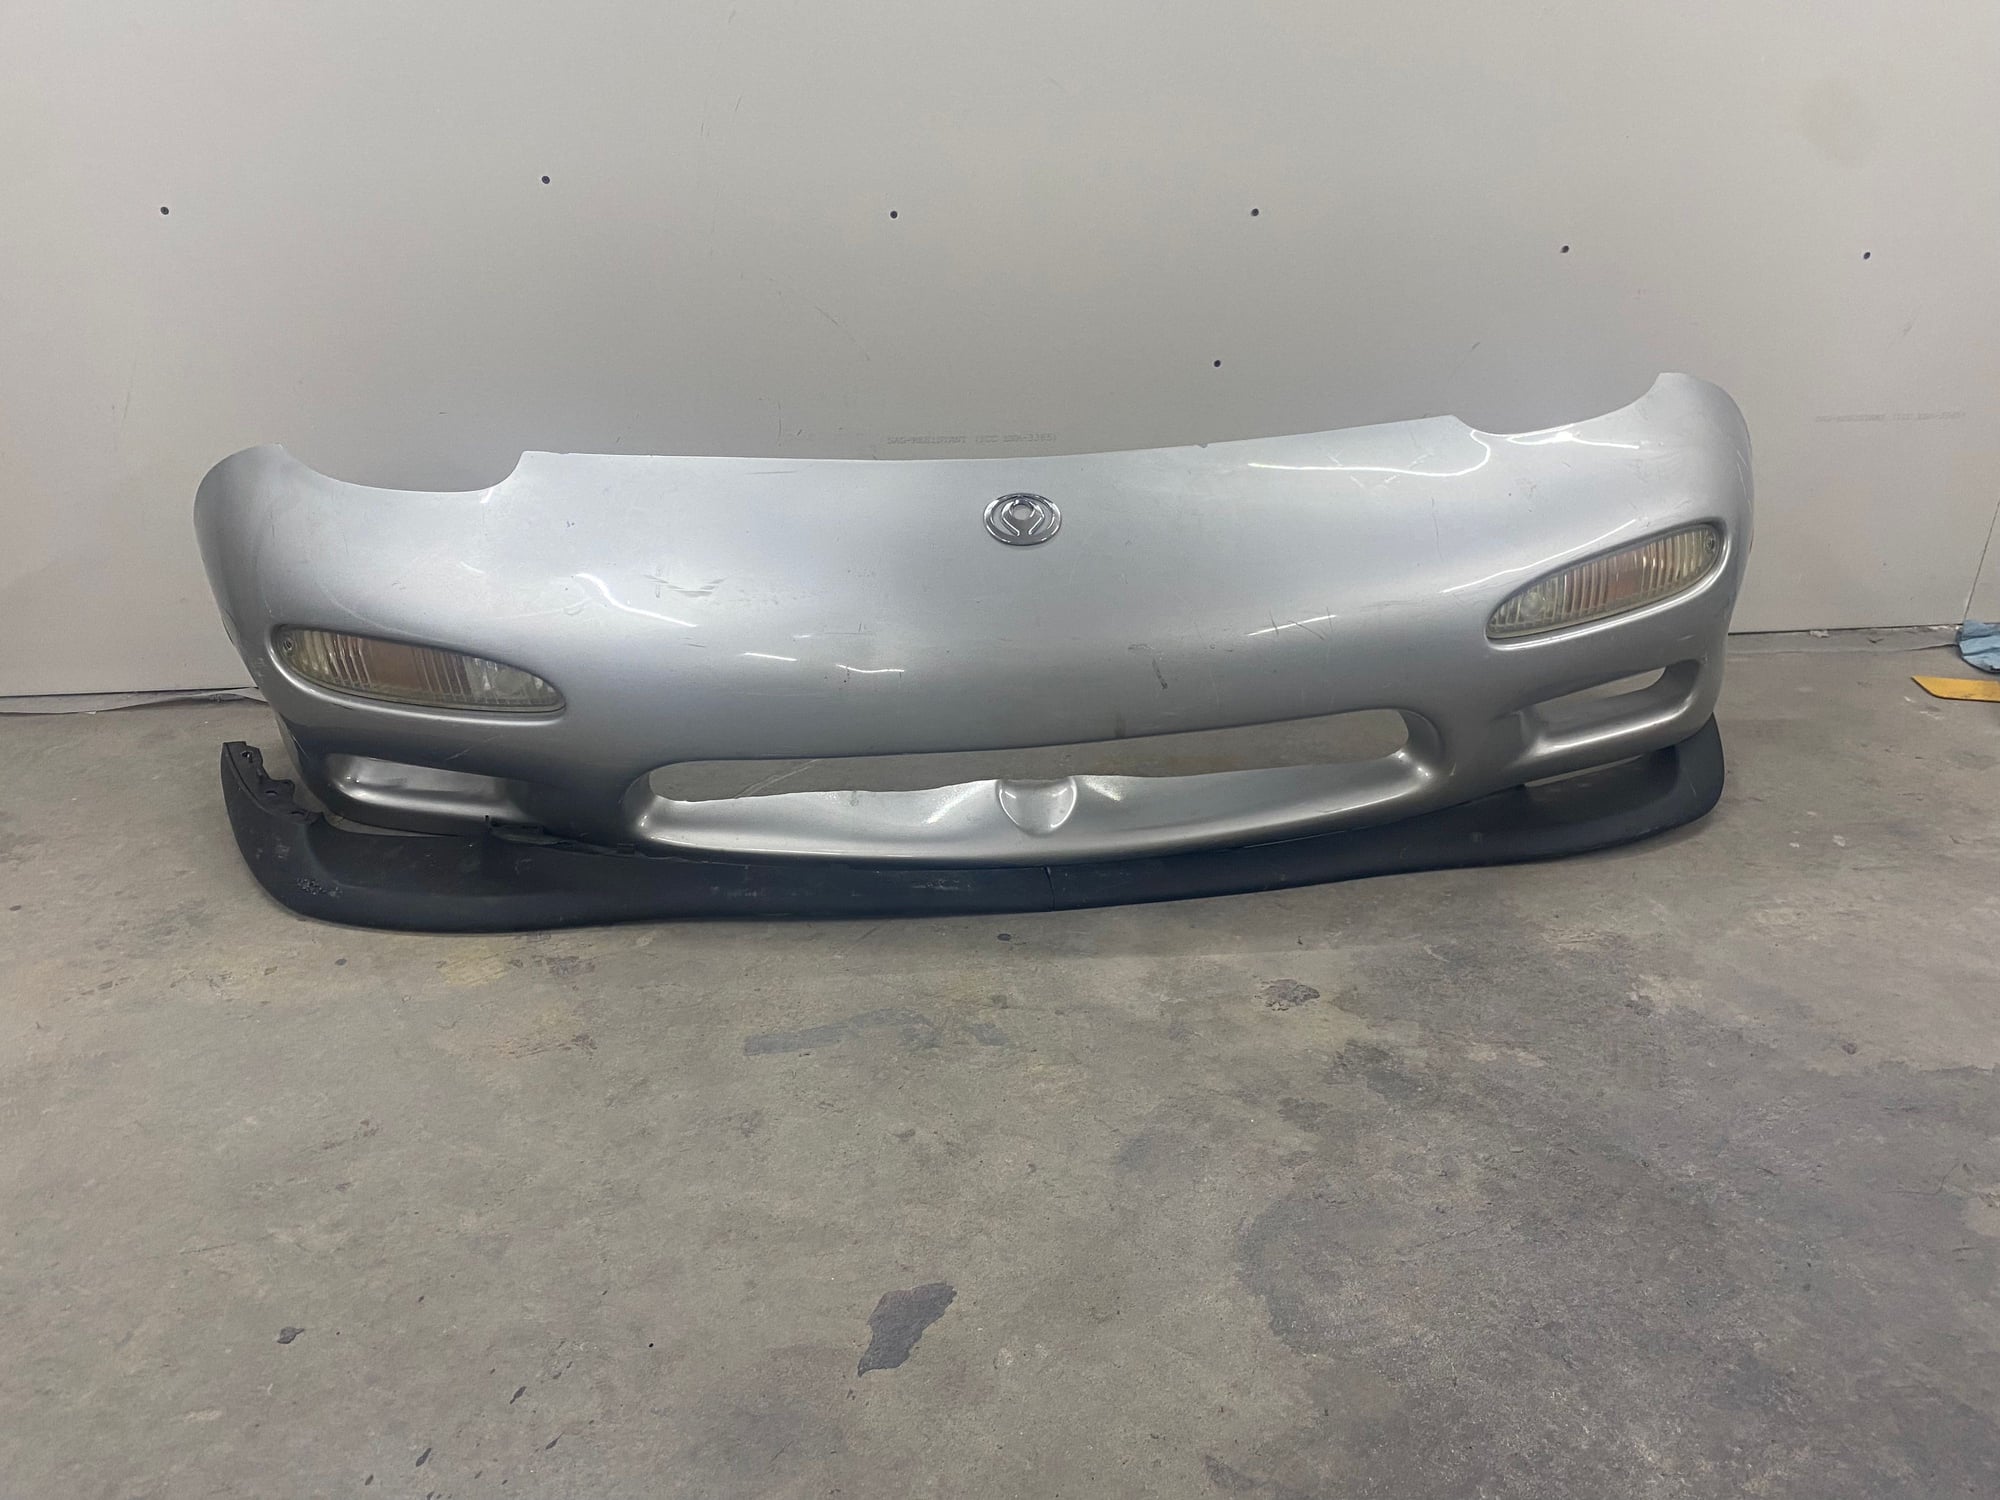 Engine - Internals - Rew plates and housings and oem bumpers - Used - 1993 to 1995 Mazda RX-7 - Marietta, GA 30064, United States